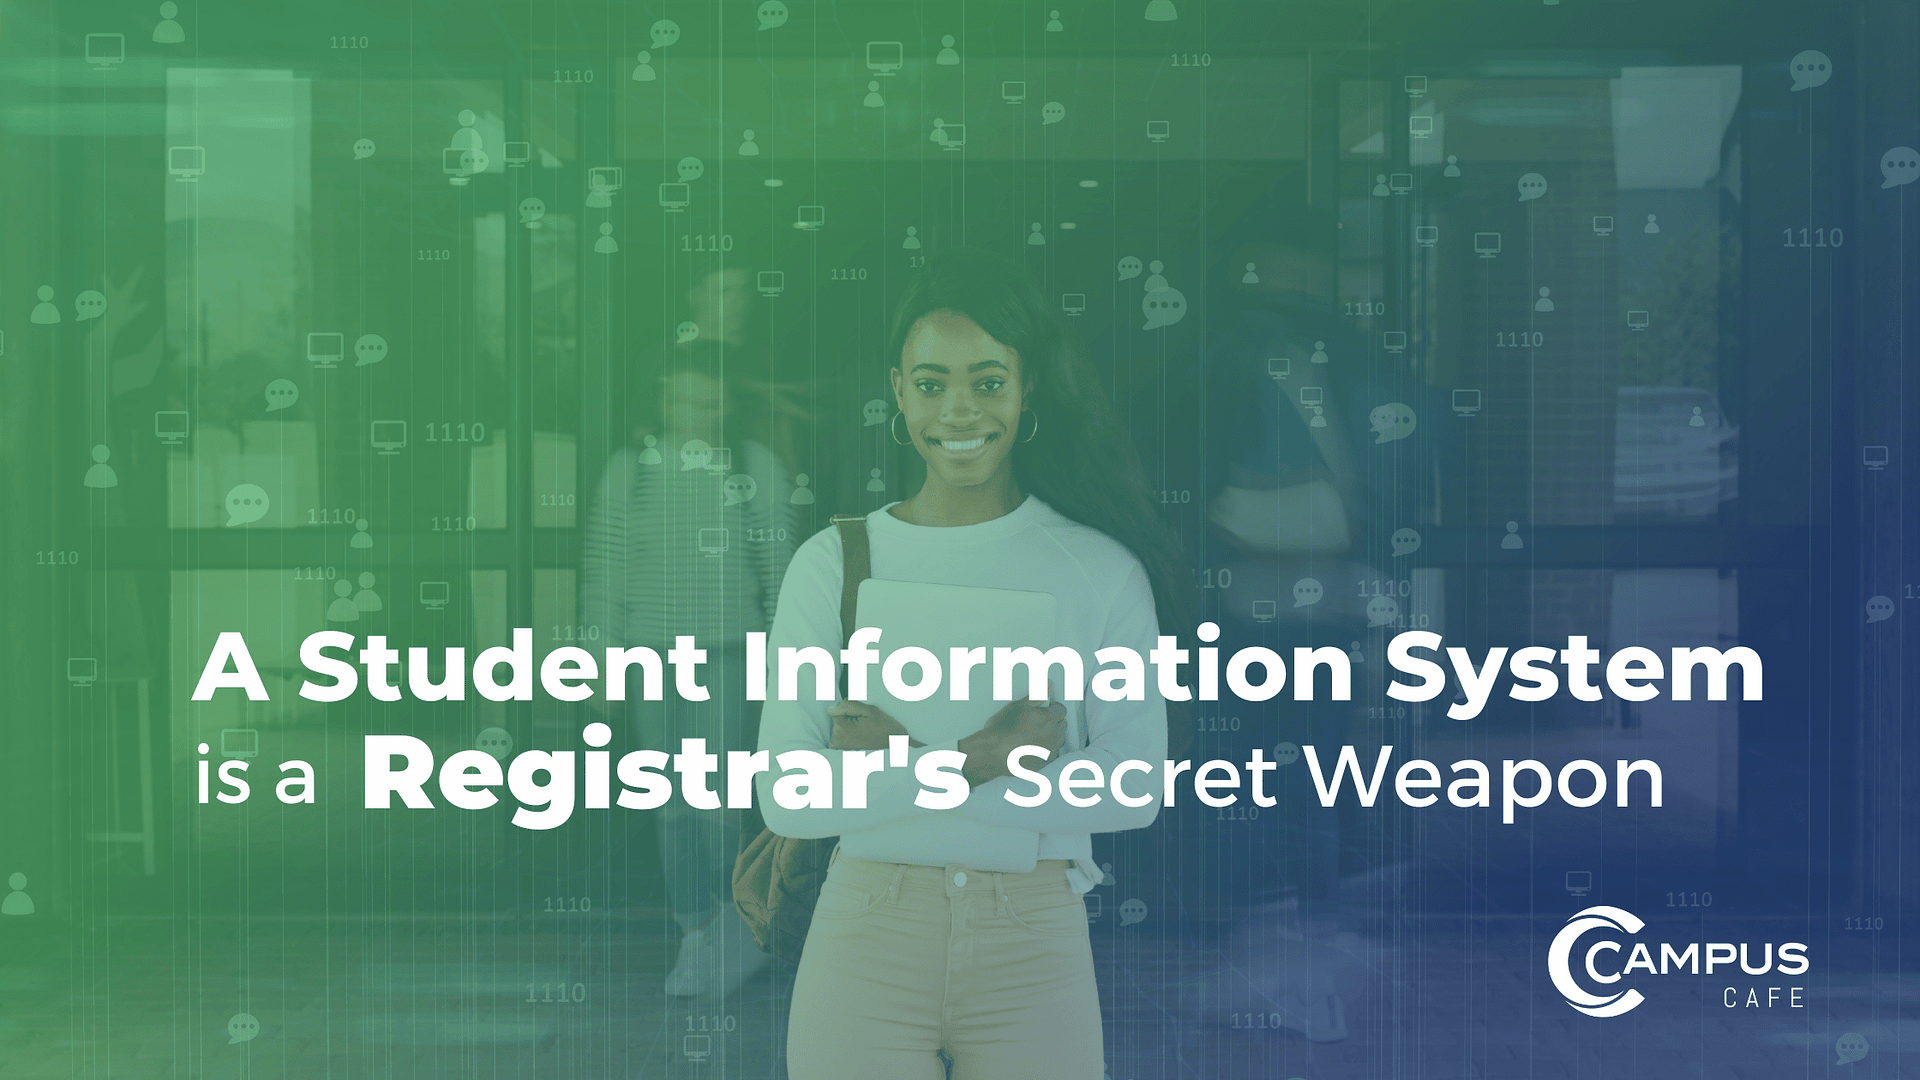 See how a student information system can be a registrar's secret weapon.